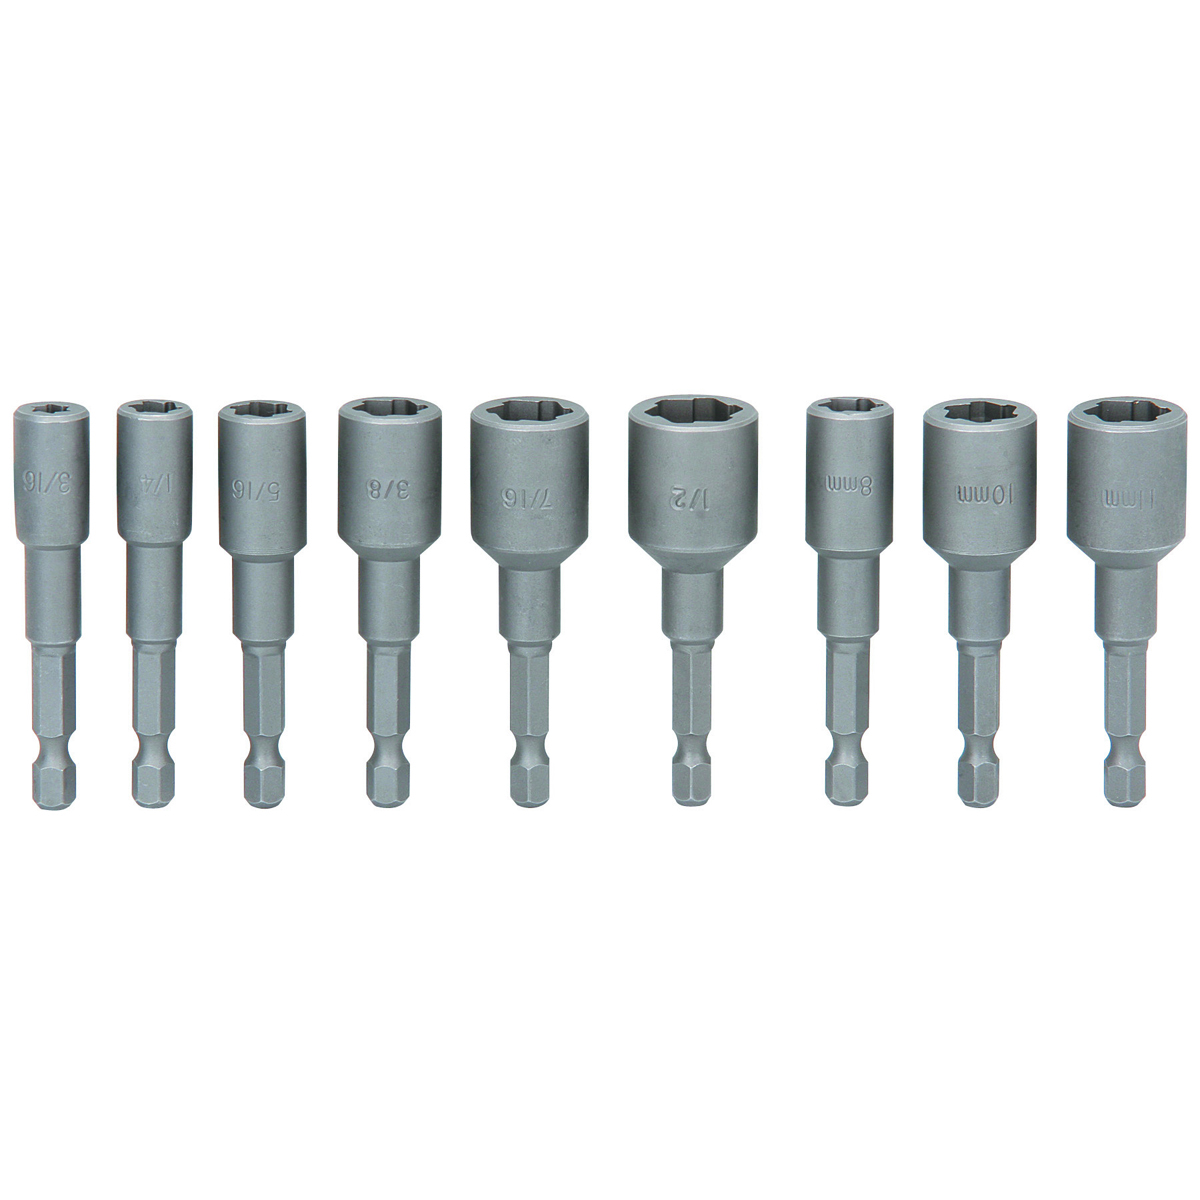 PITTSBURGH 1/4 in. Drive Nut and Bolt Extractor Set 9 Pc. - Item 66566